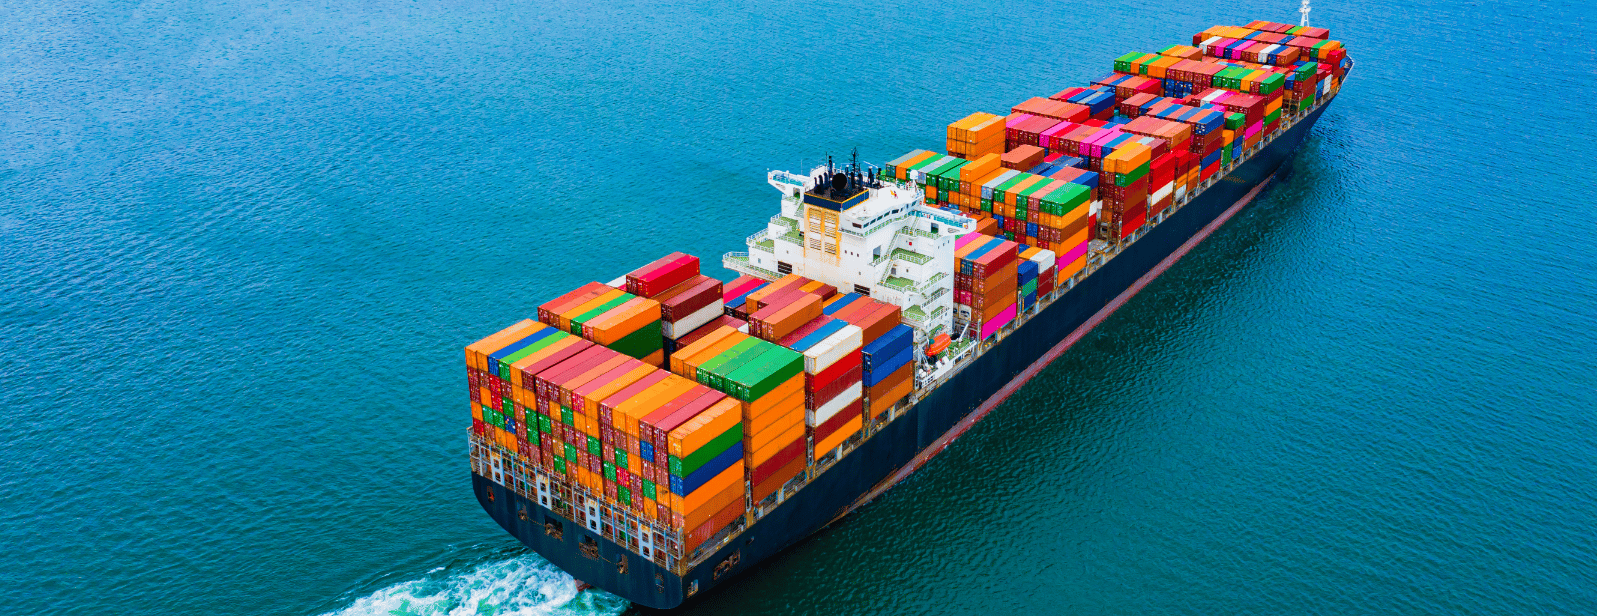 A cargo ship in the ocean carrying shipping containers